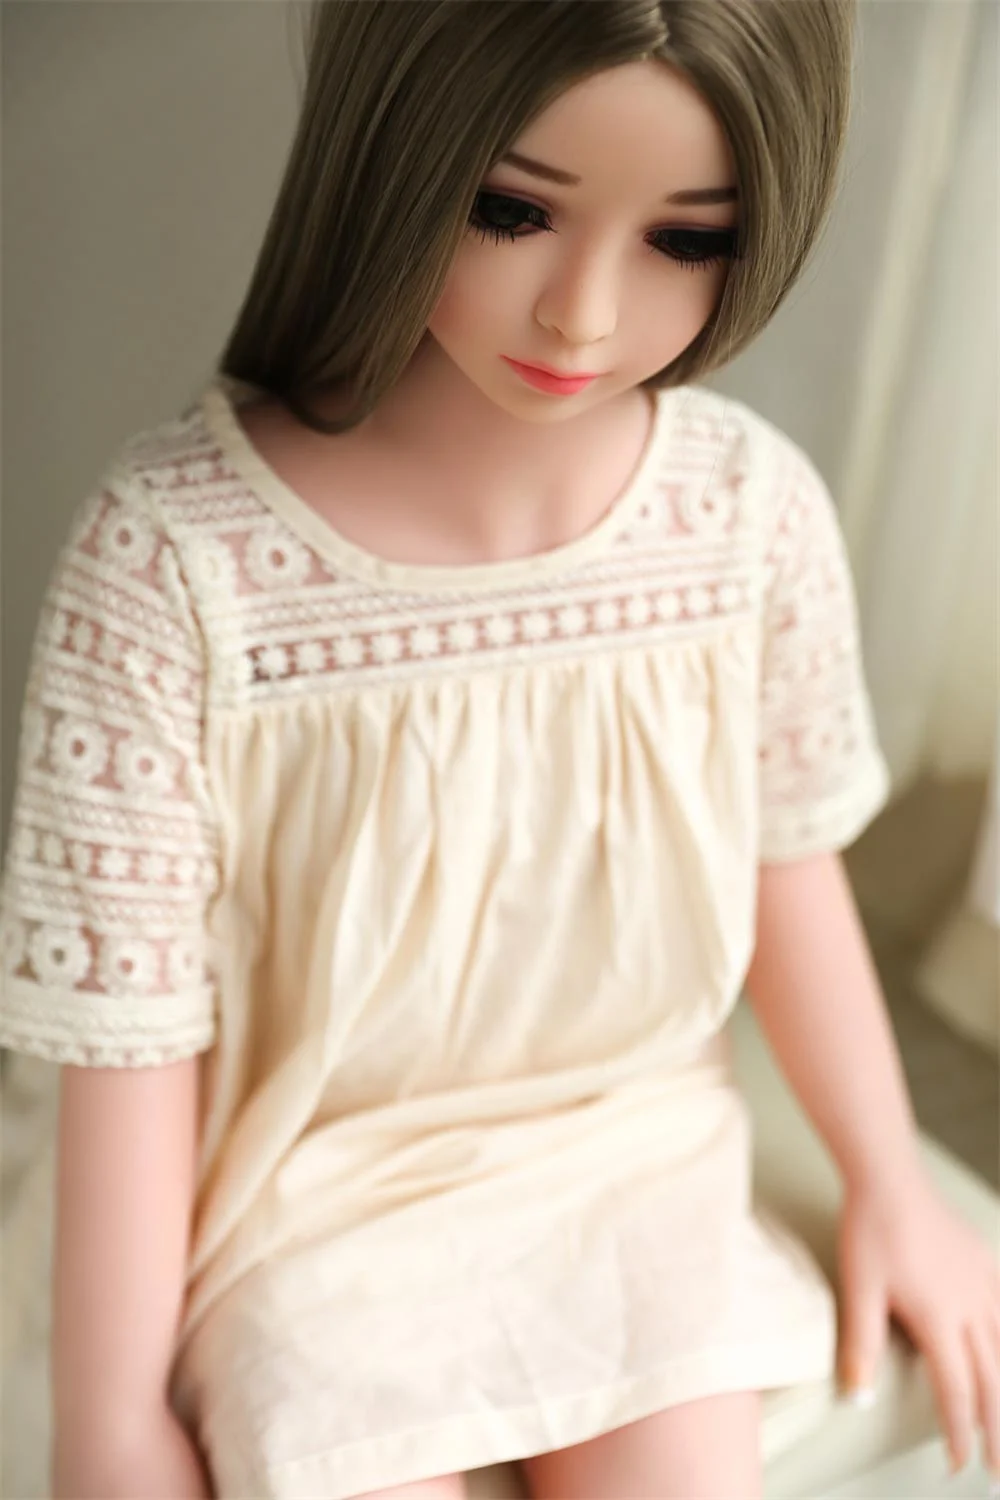 Brown haired mini sex doll